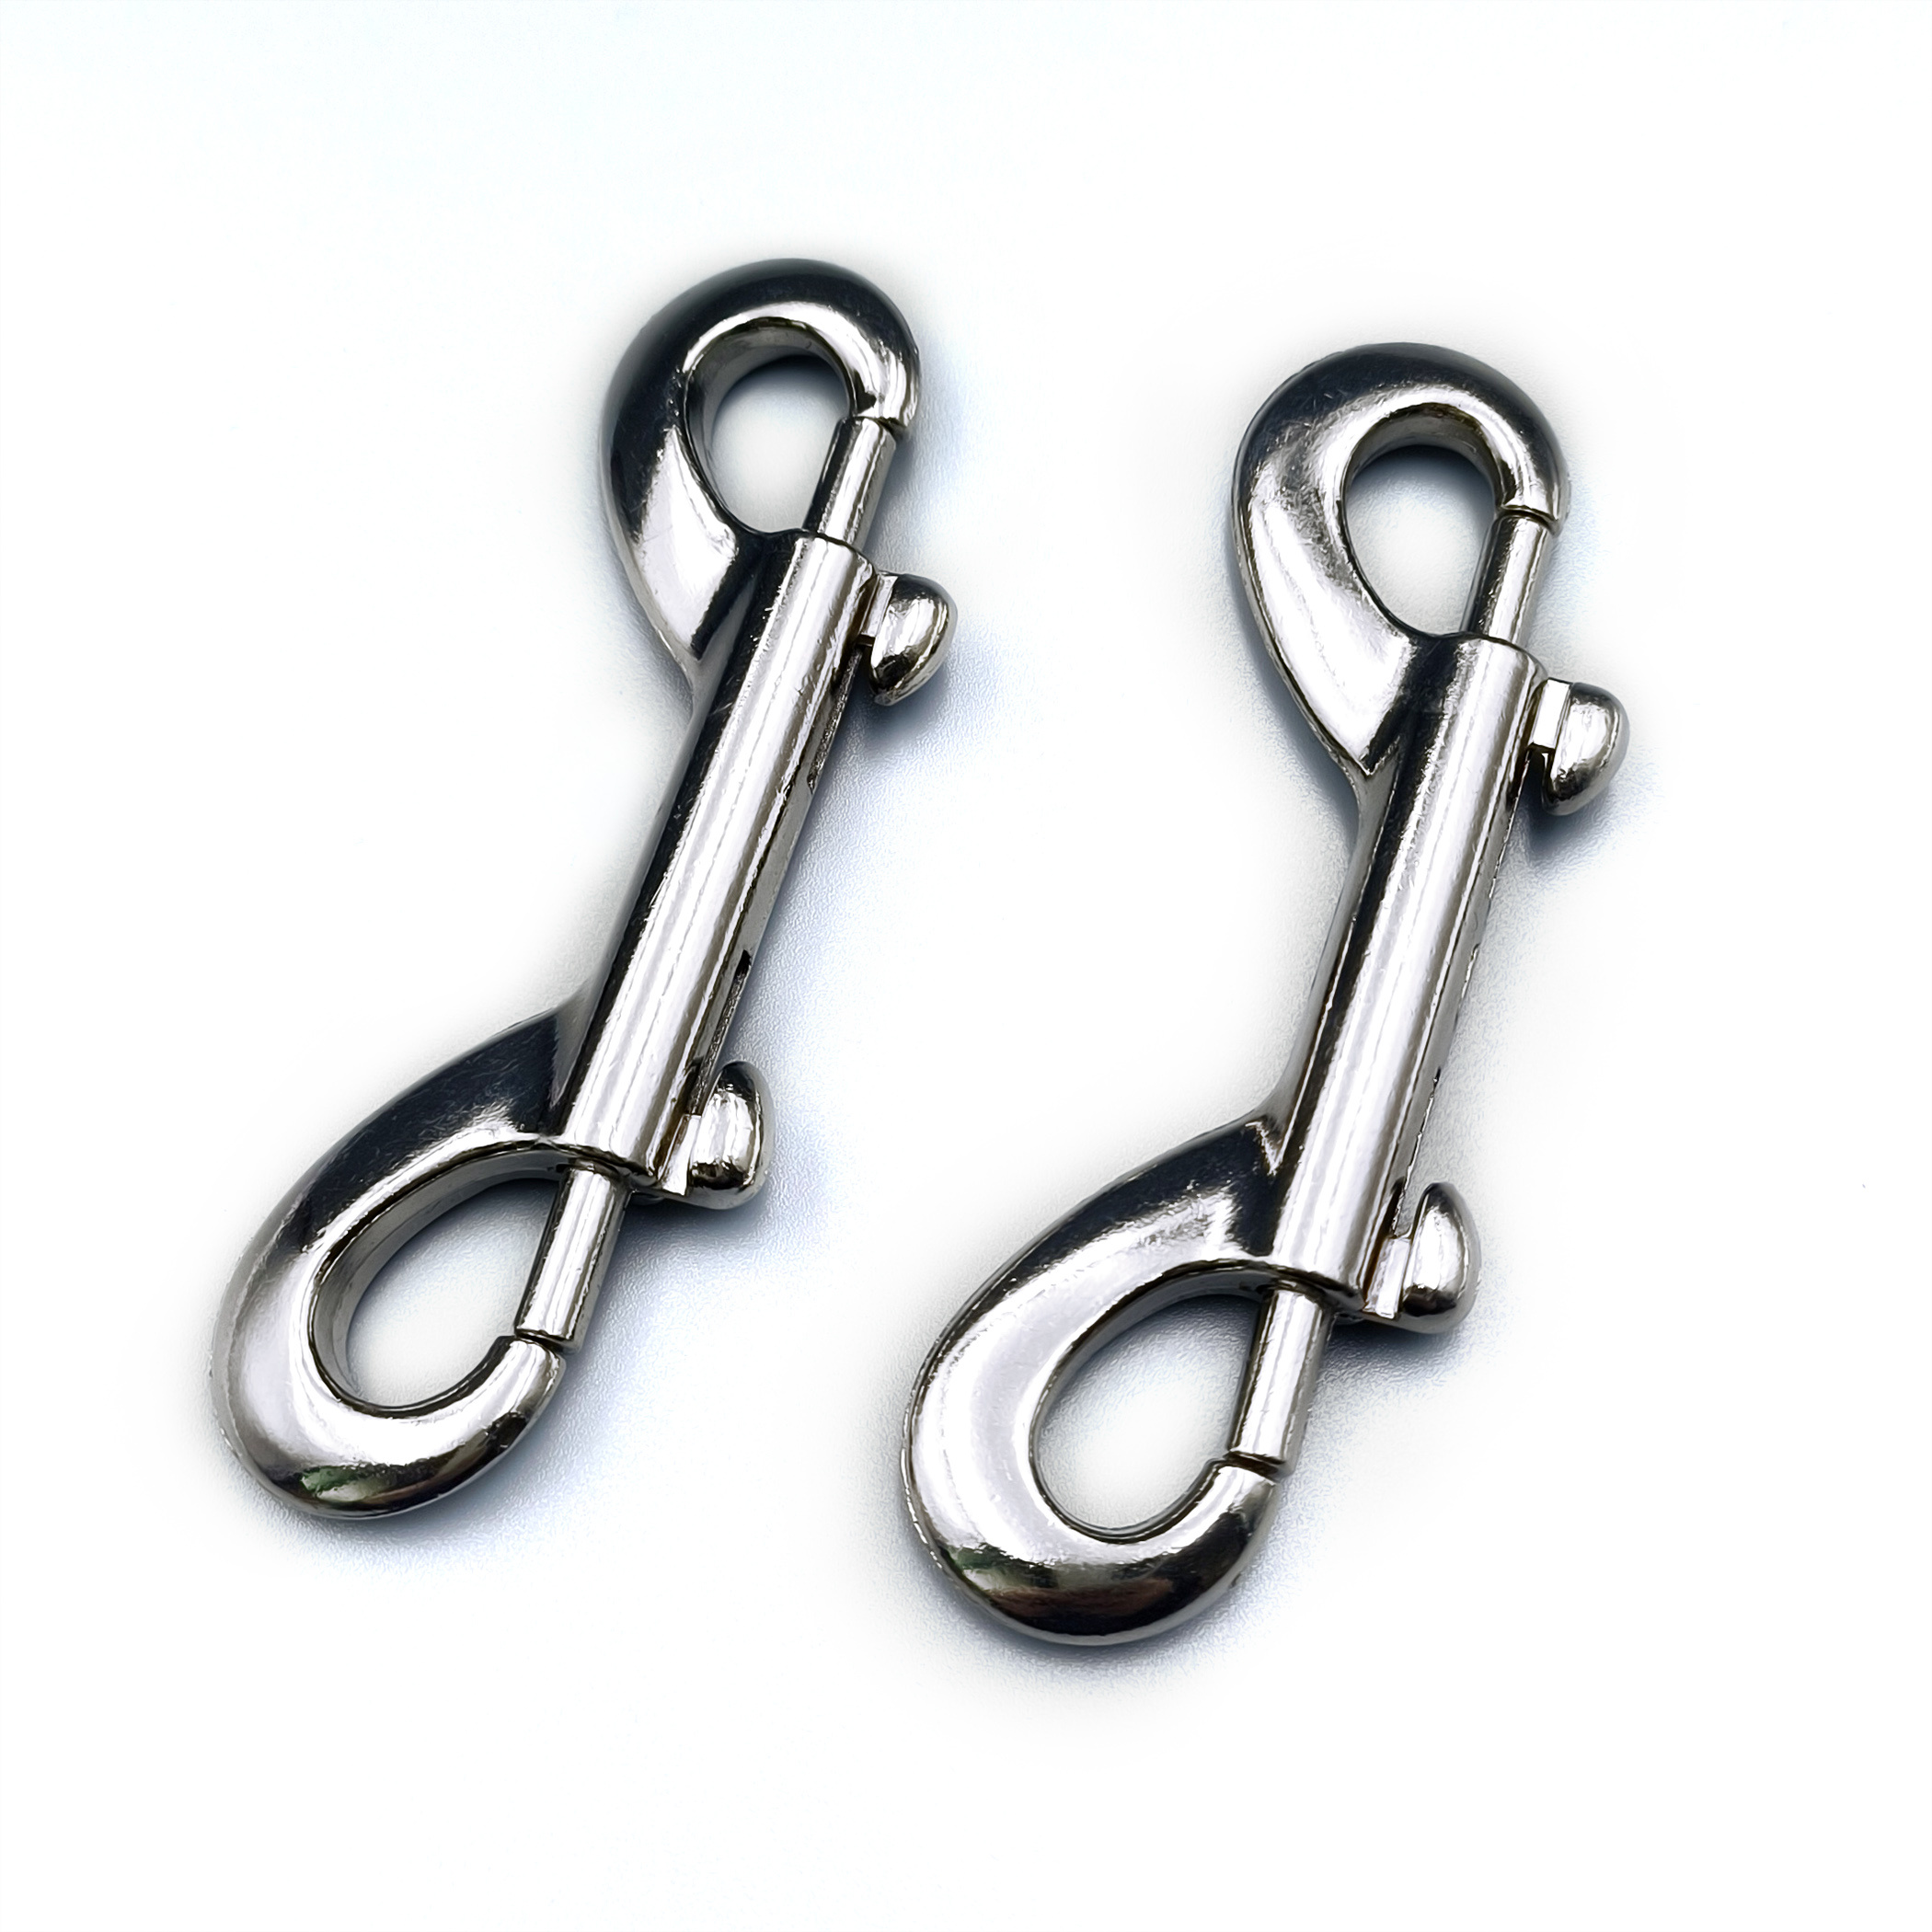 Alloy Spring Clasp Double S Hook Spring Clasp. Easy Open 